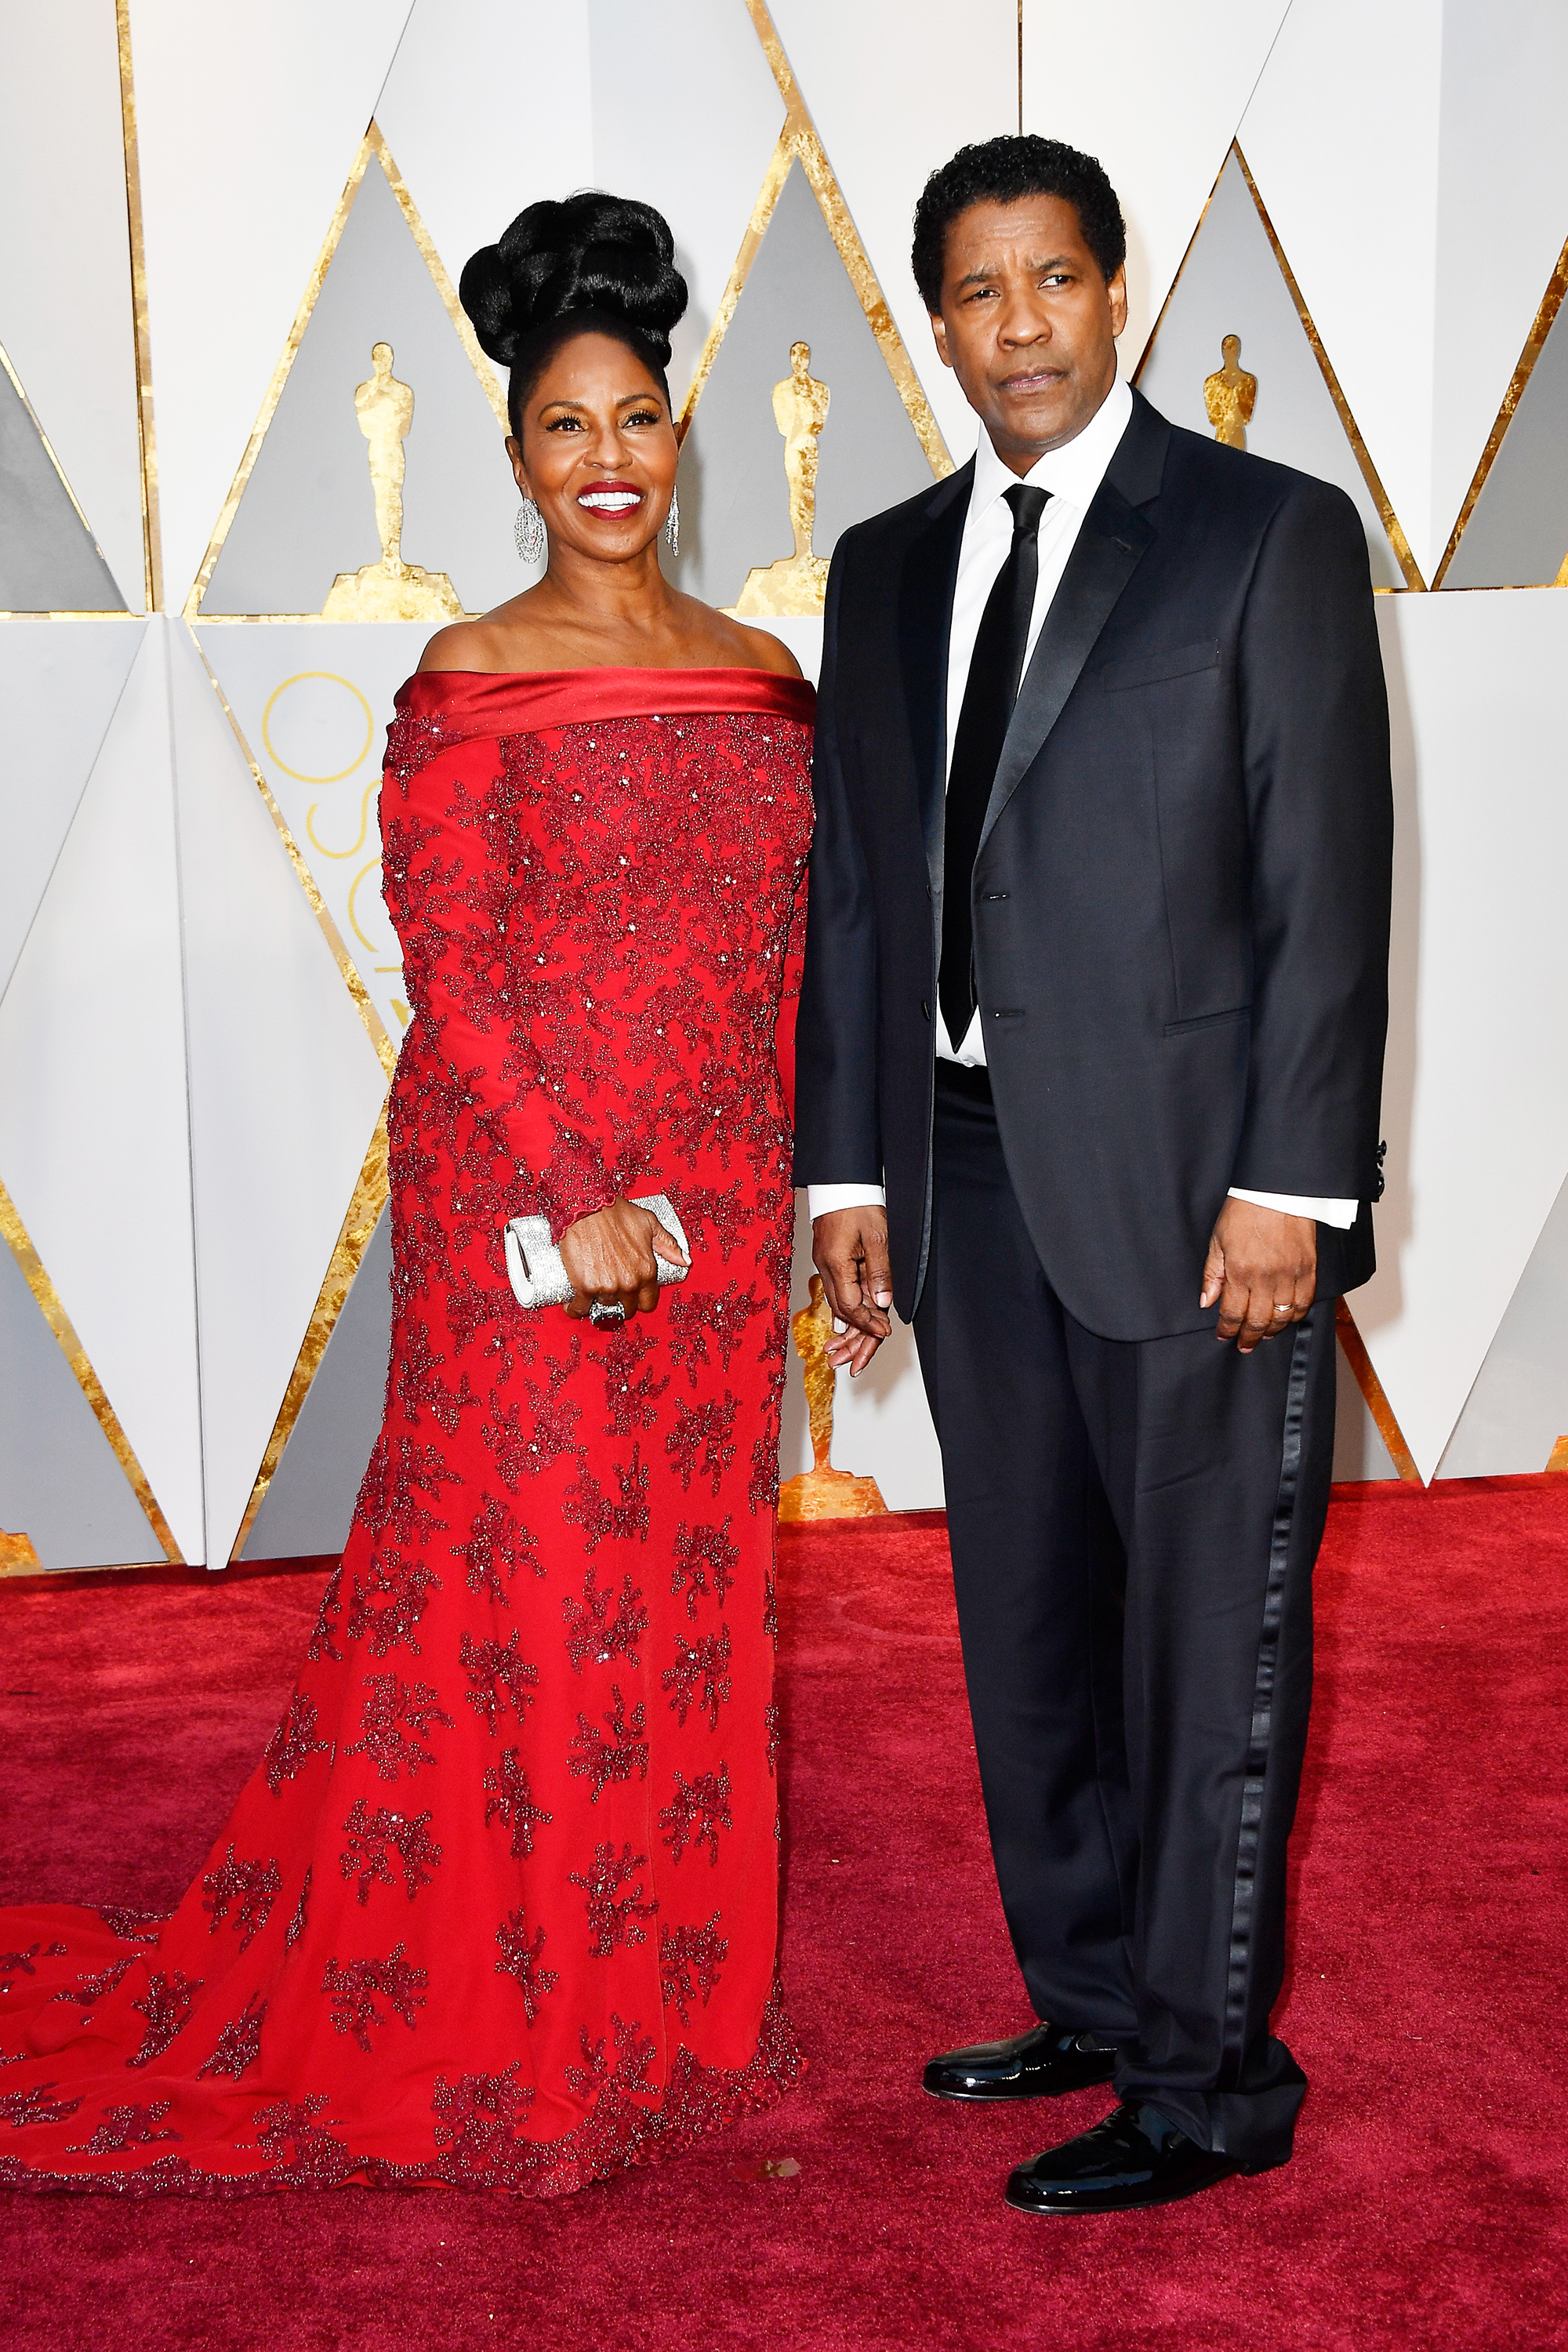 Pauletta Washington and Denzel Washington on the red carpet for the 89th Oscars, on Feb. 26, 2017 in Hollywood, Calif.